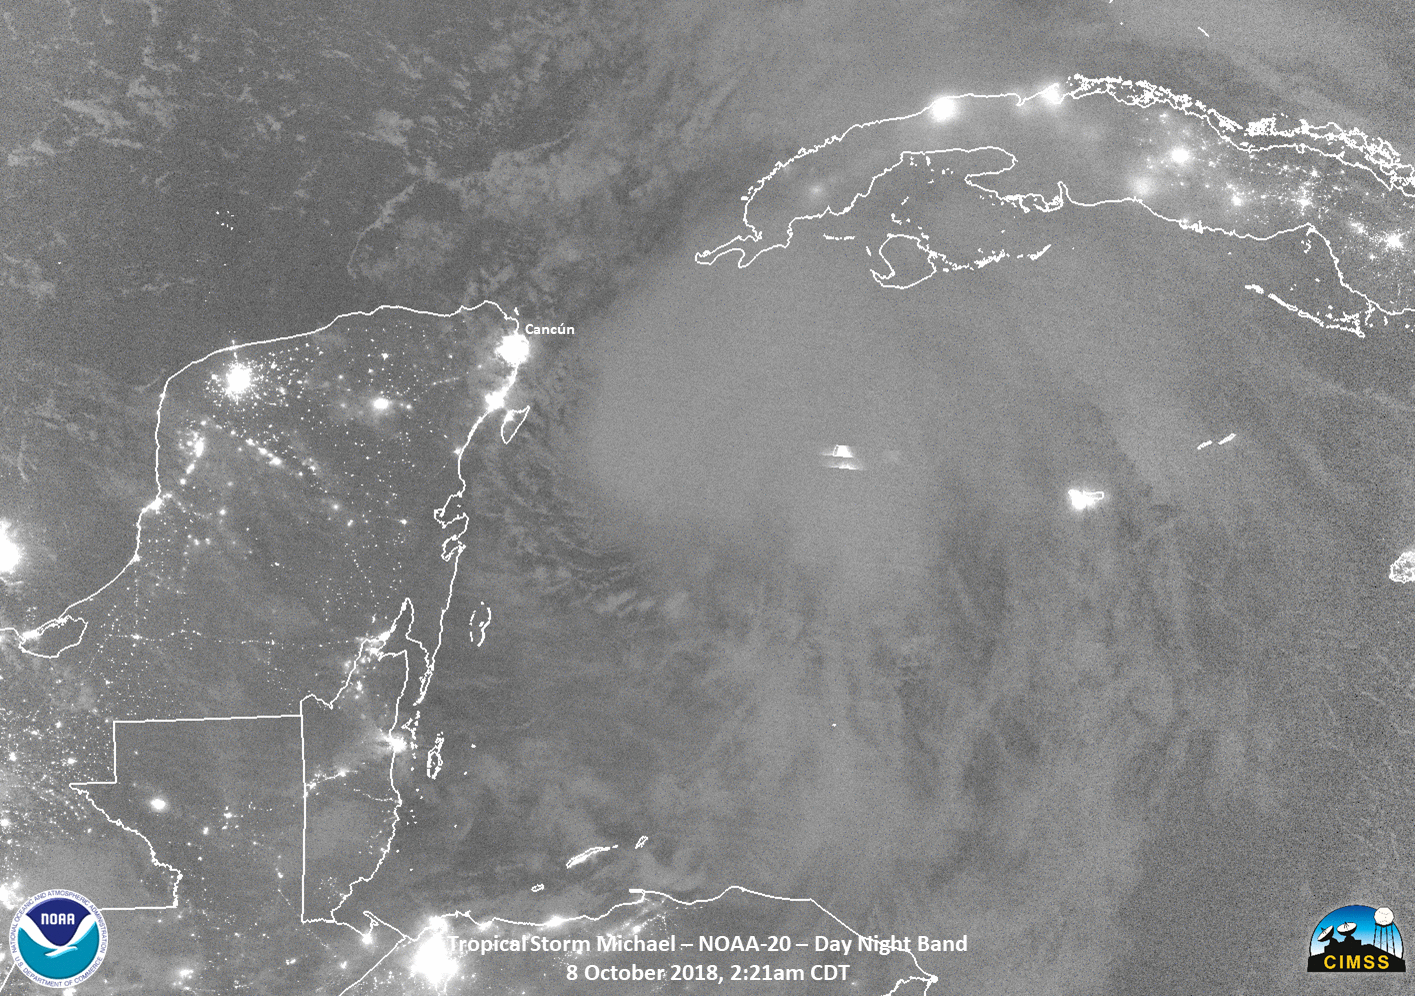 NOAA-20 VIIRS Day/Night Band (0.7 µm), Infrared Window (11.45 µm) and ATMS Microwave (88 GHz) images [click to enlarge]